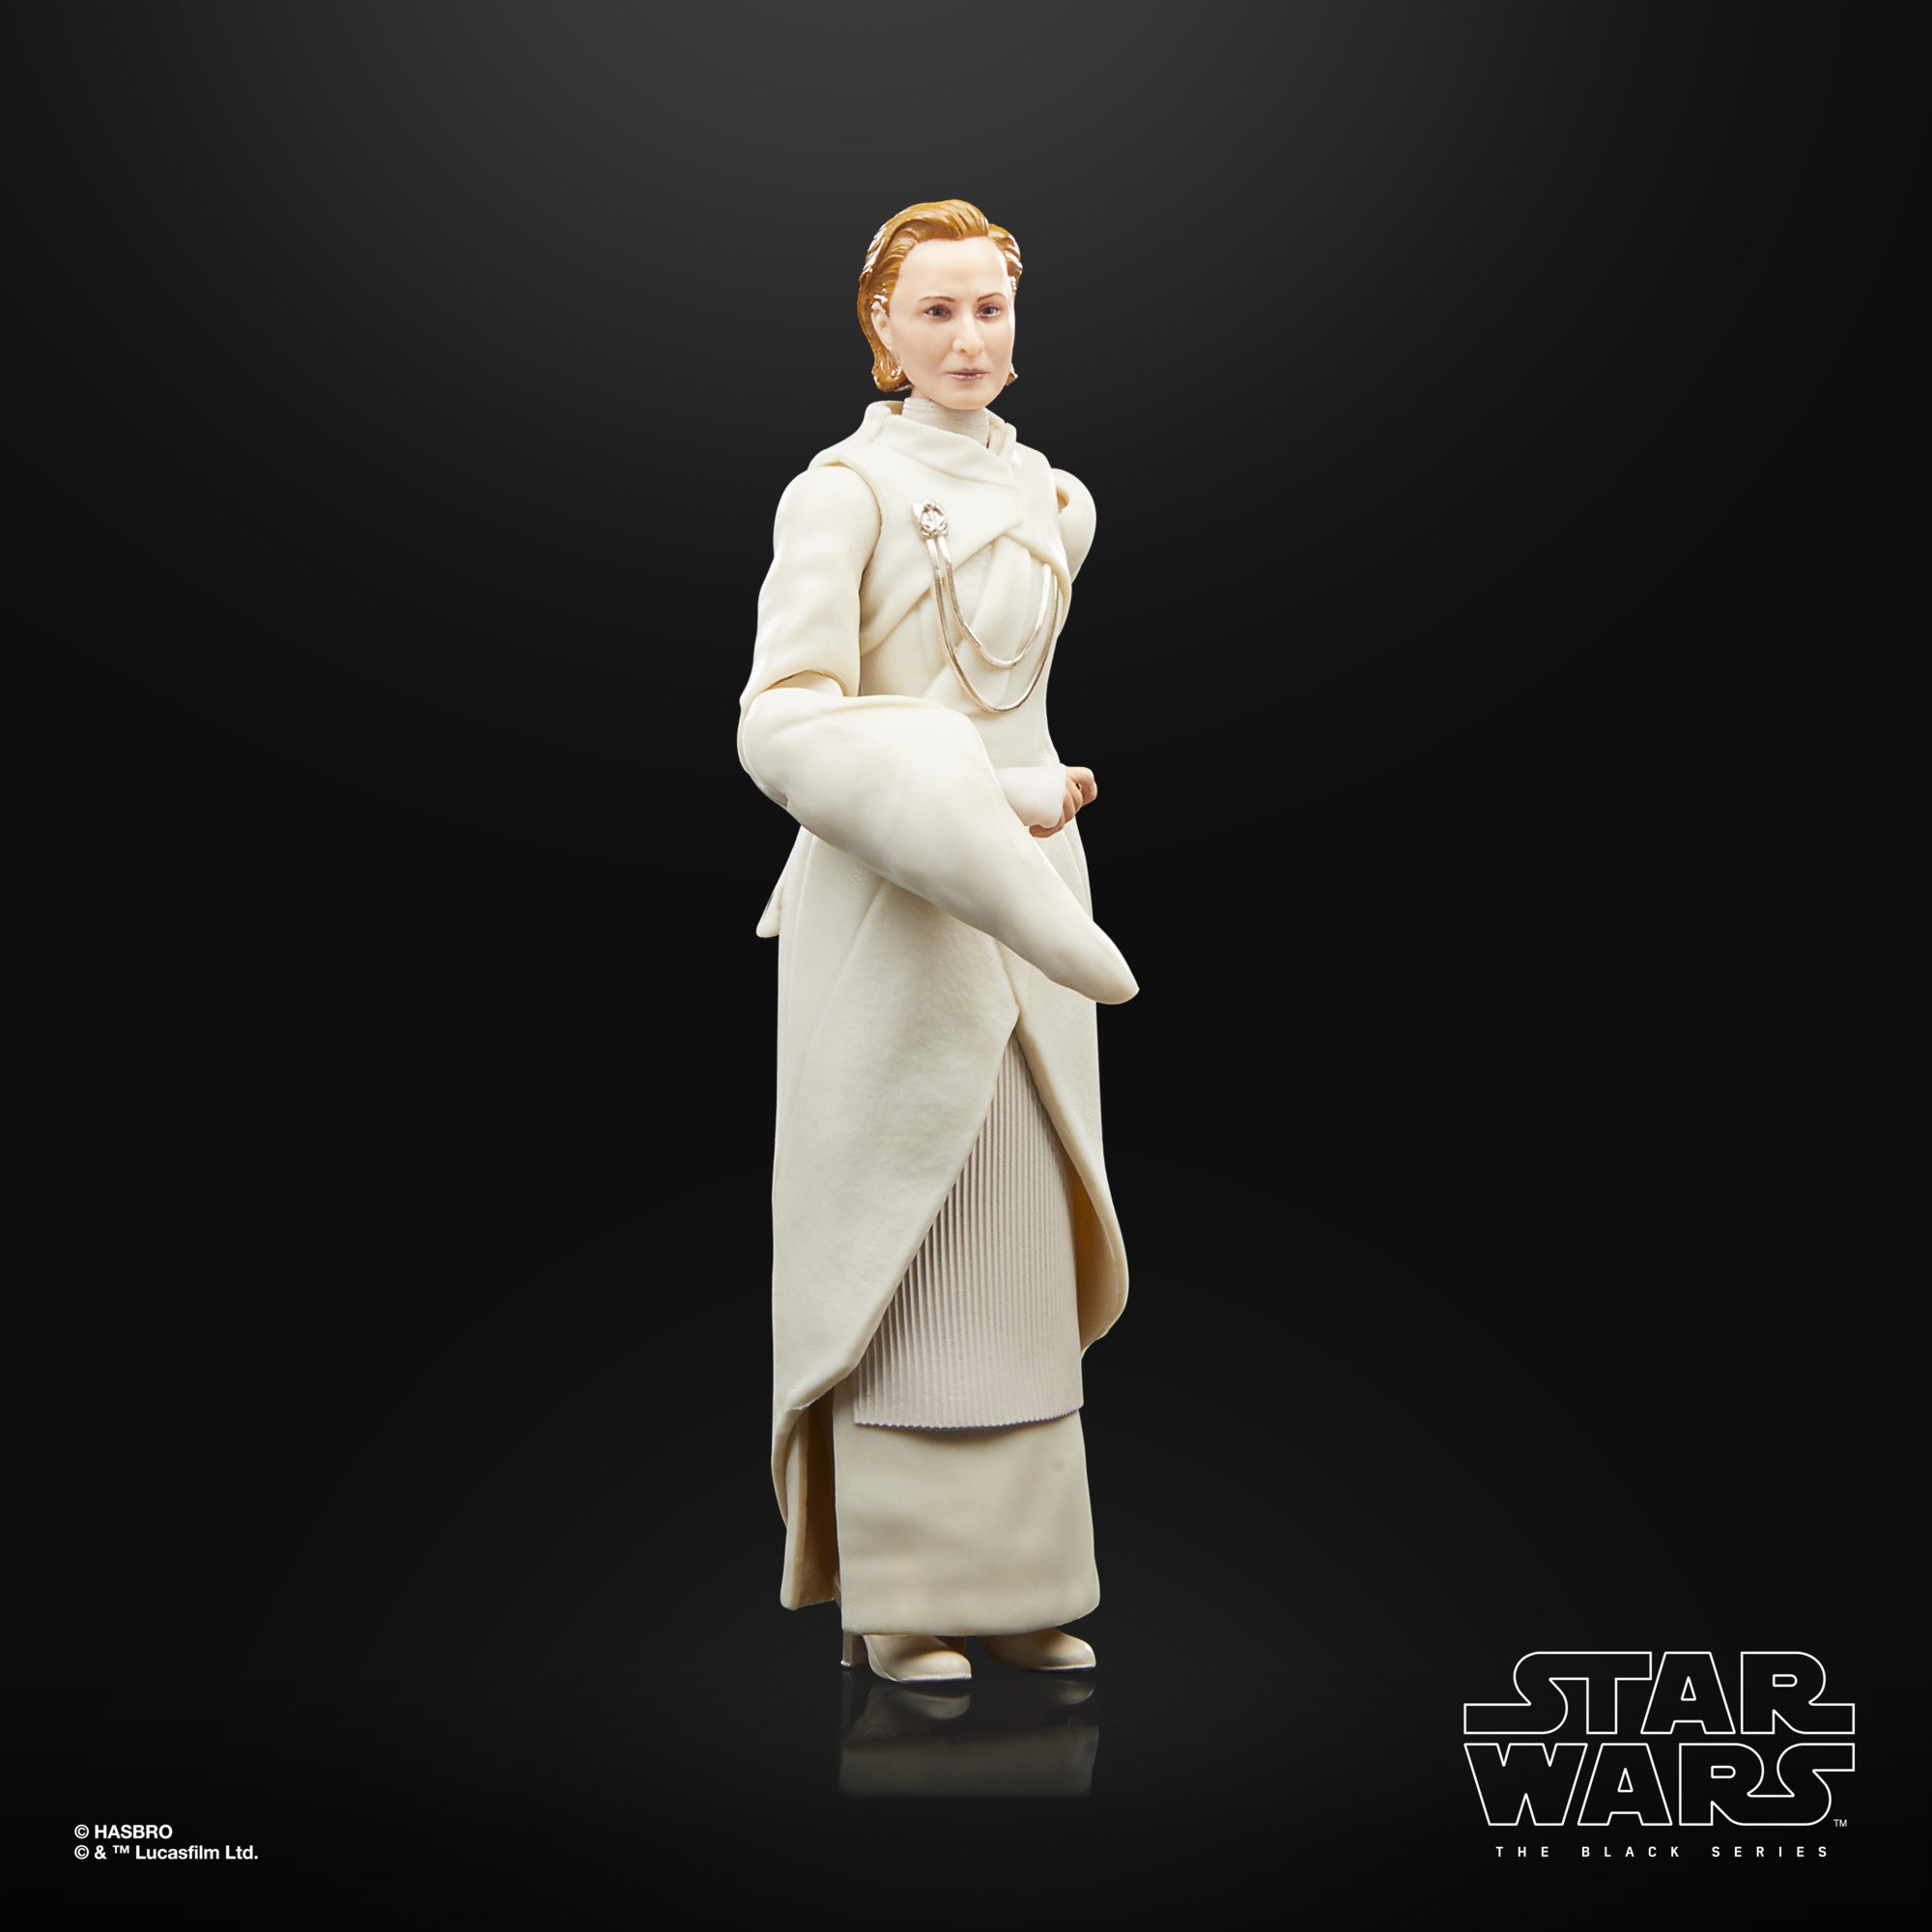 Hasbro Reveals New 'Star Wars' Vintage Collection and Black Series Products  at Pulse Con 2022 - Star Wars News Net